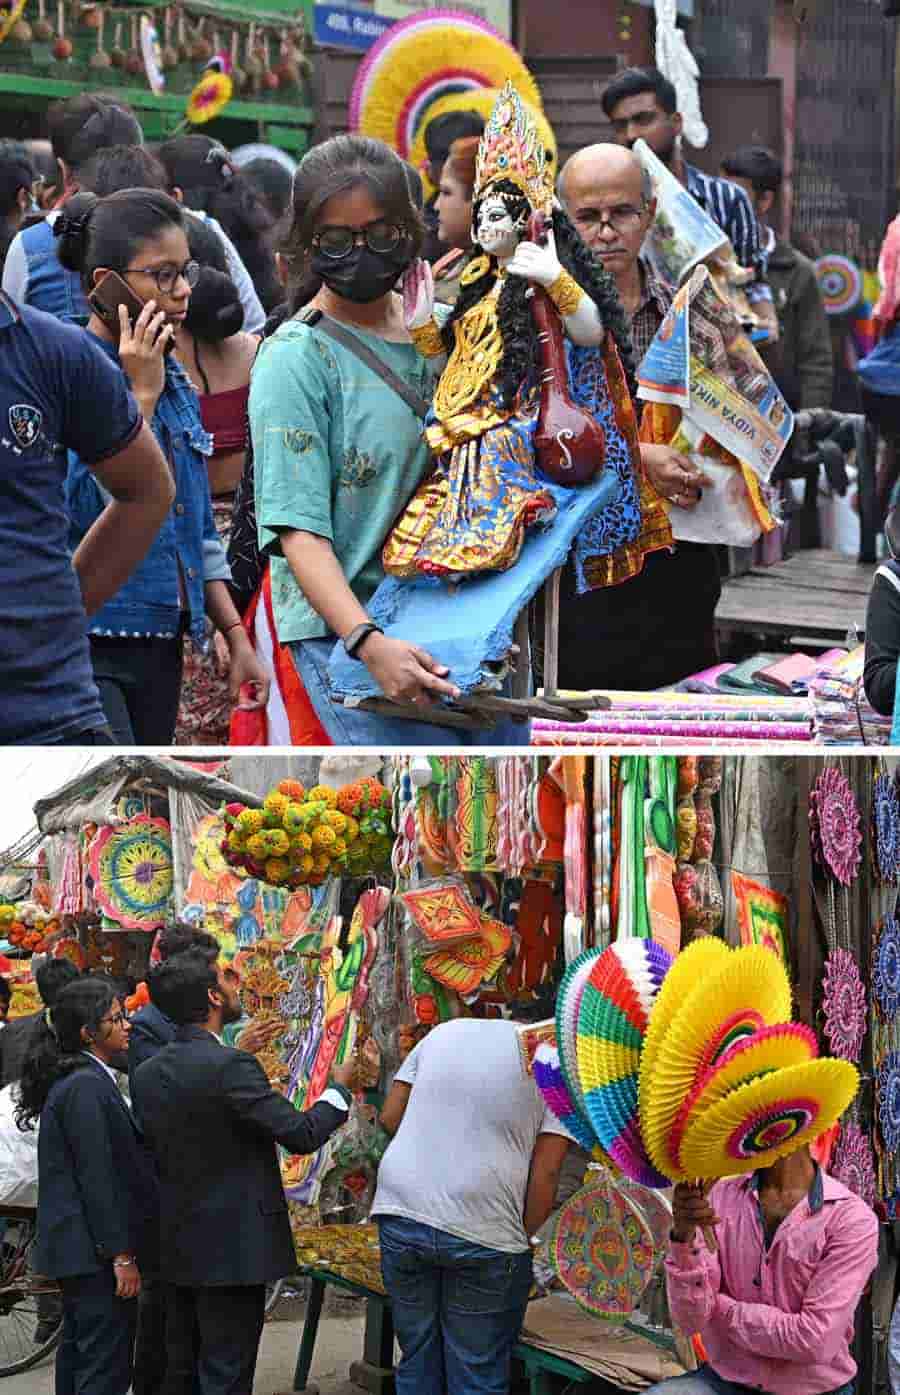 As the city gets ready to celebrate Saraswati Puja, people were spotted taking home Saraswati idols at Kumartuli. Last-minute shopping continues in full steam